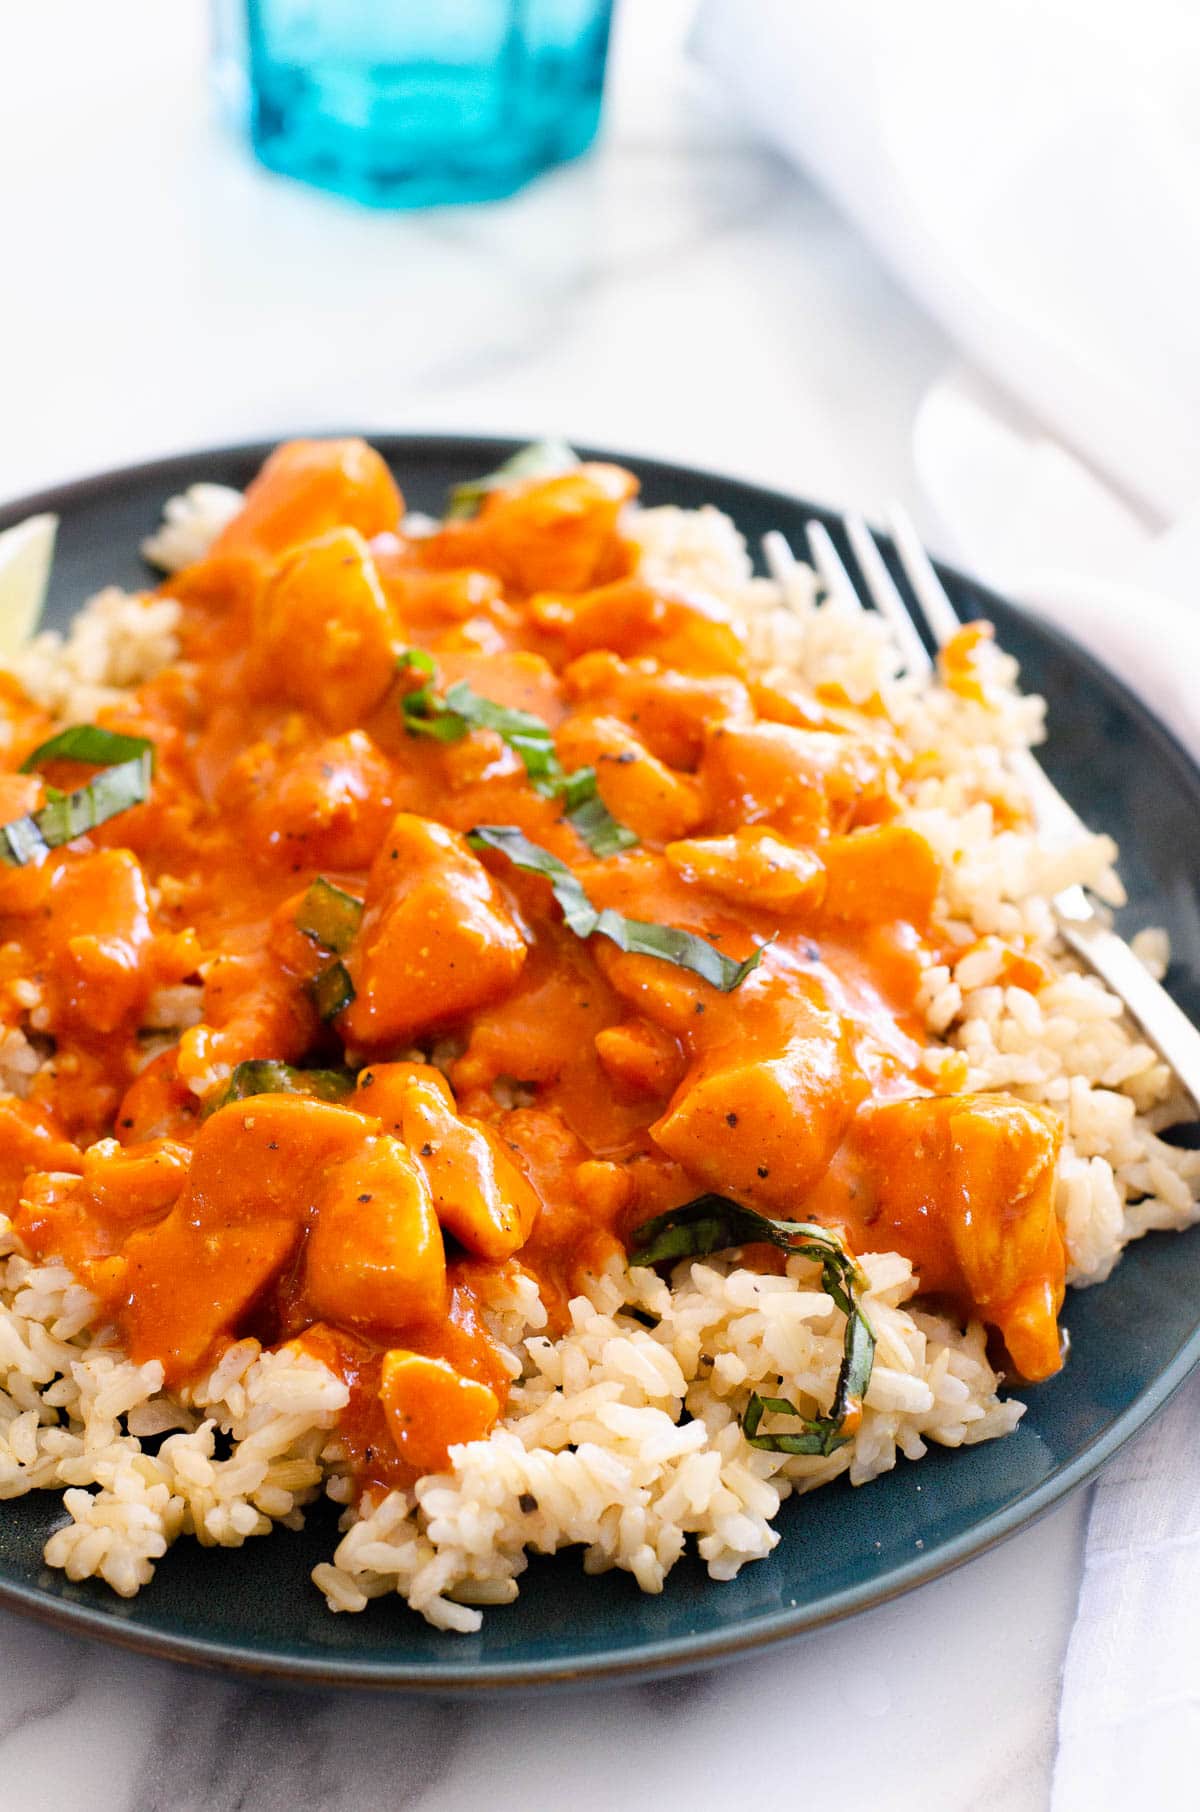 Thai chicken curry recipe served on a bed of brown rice and garnished with basil.